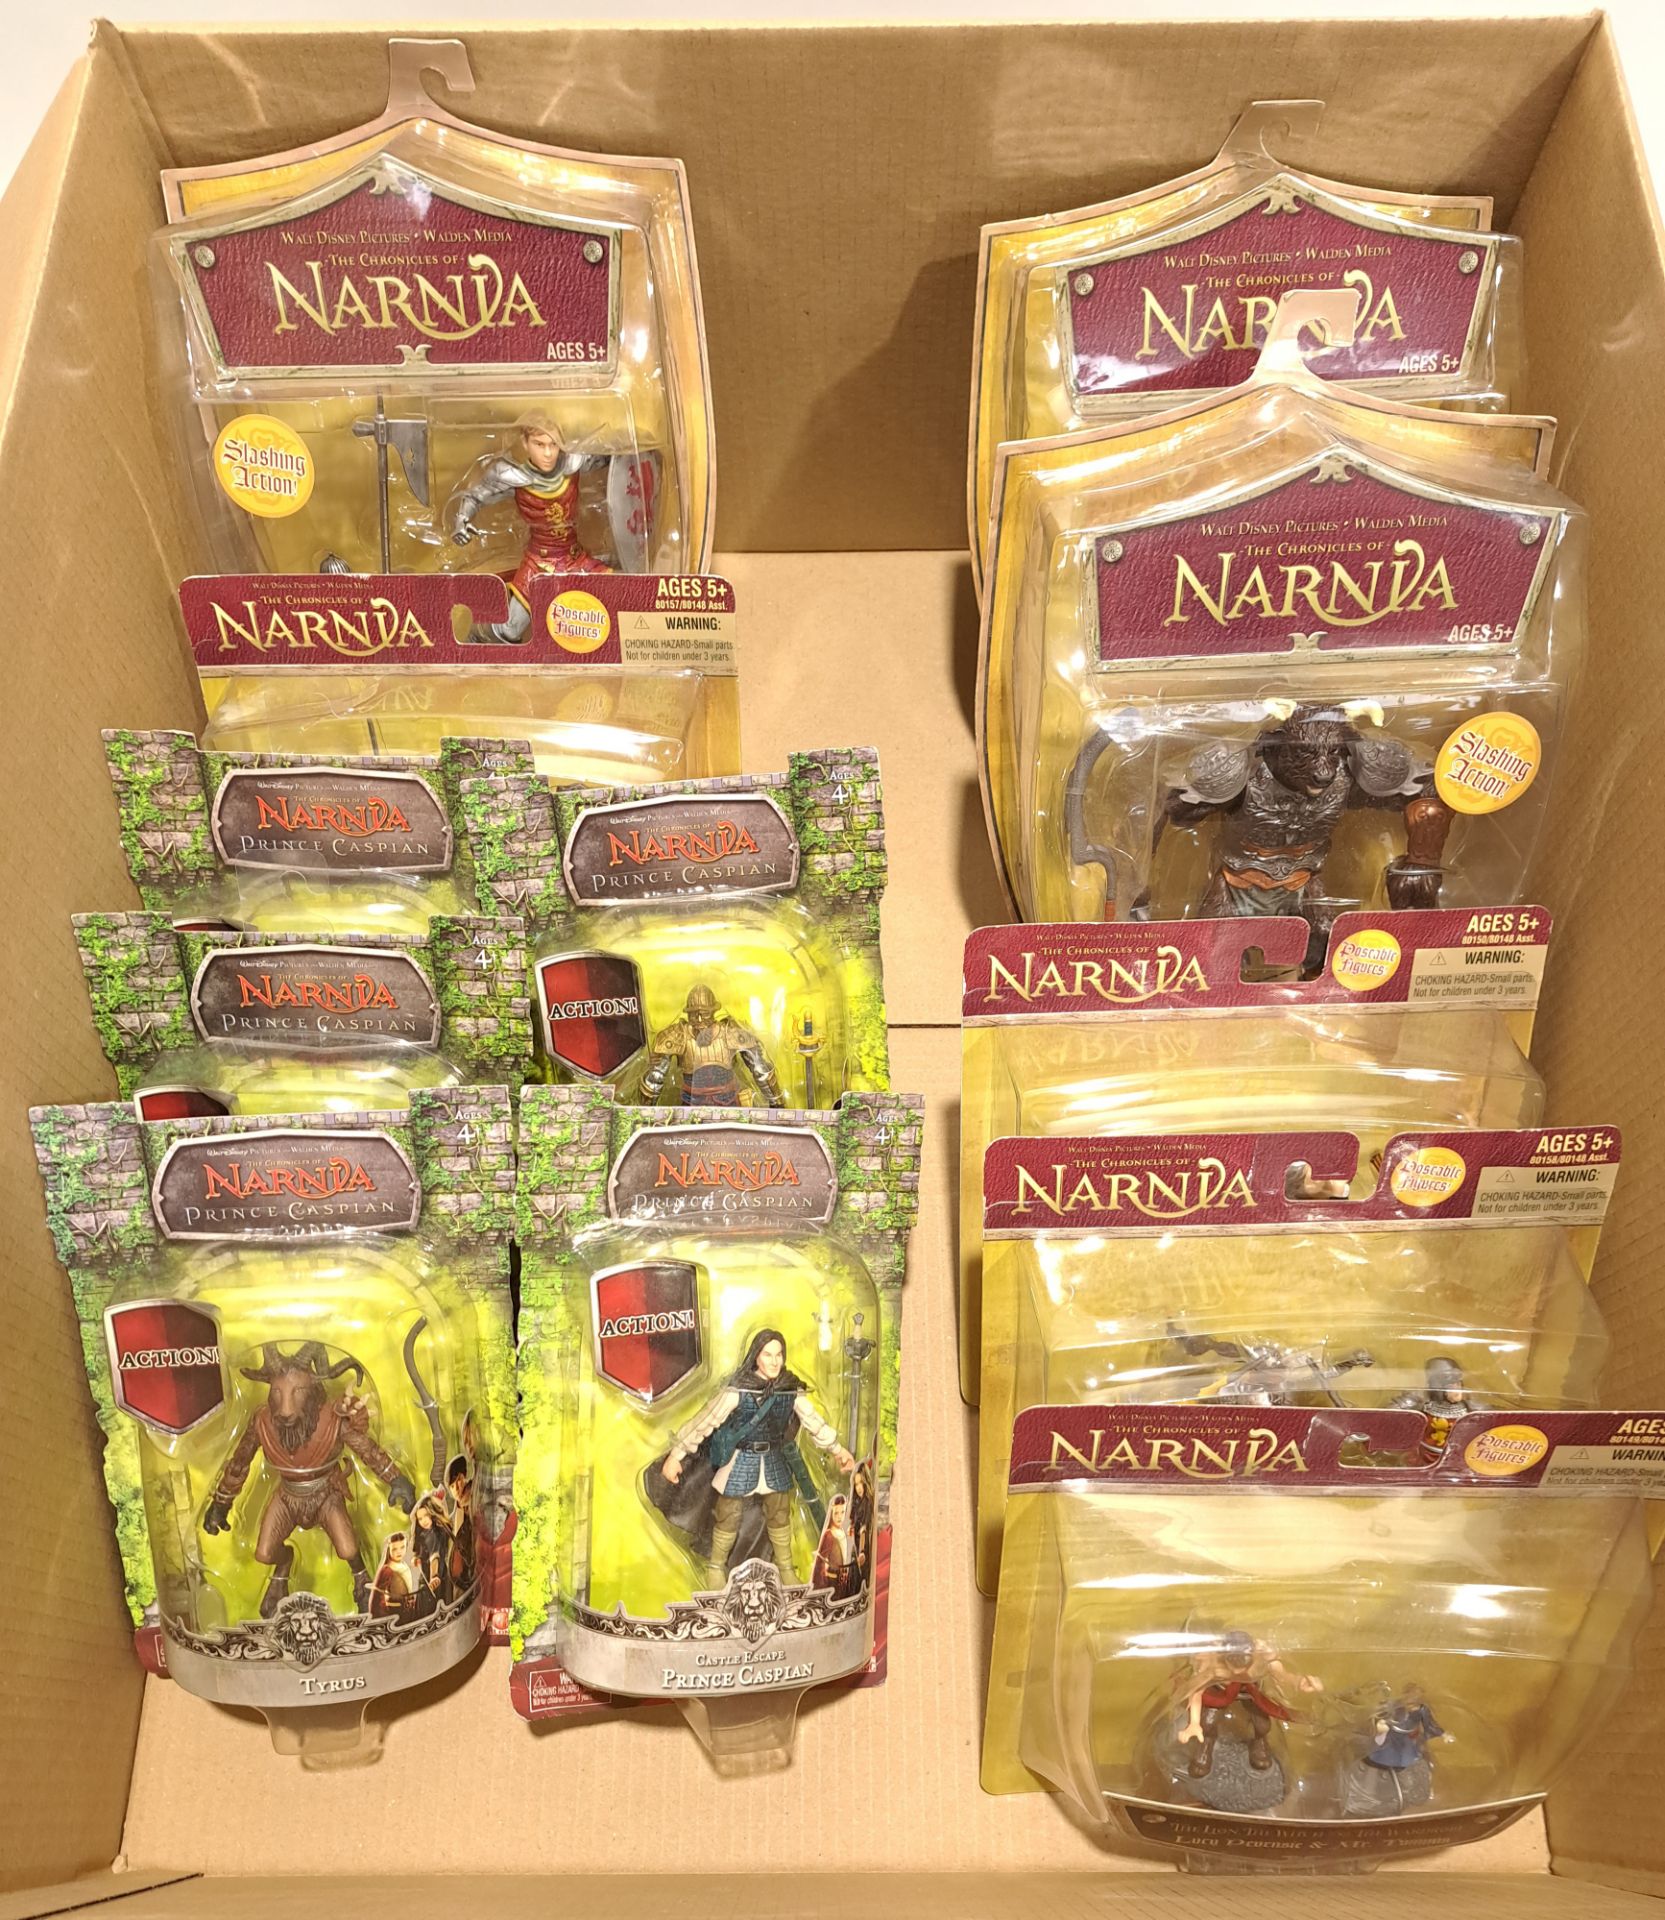 Quantity of Narnia Action Figures